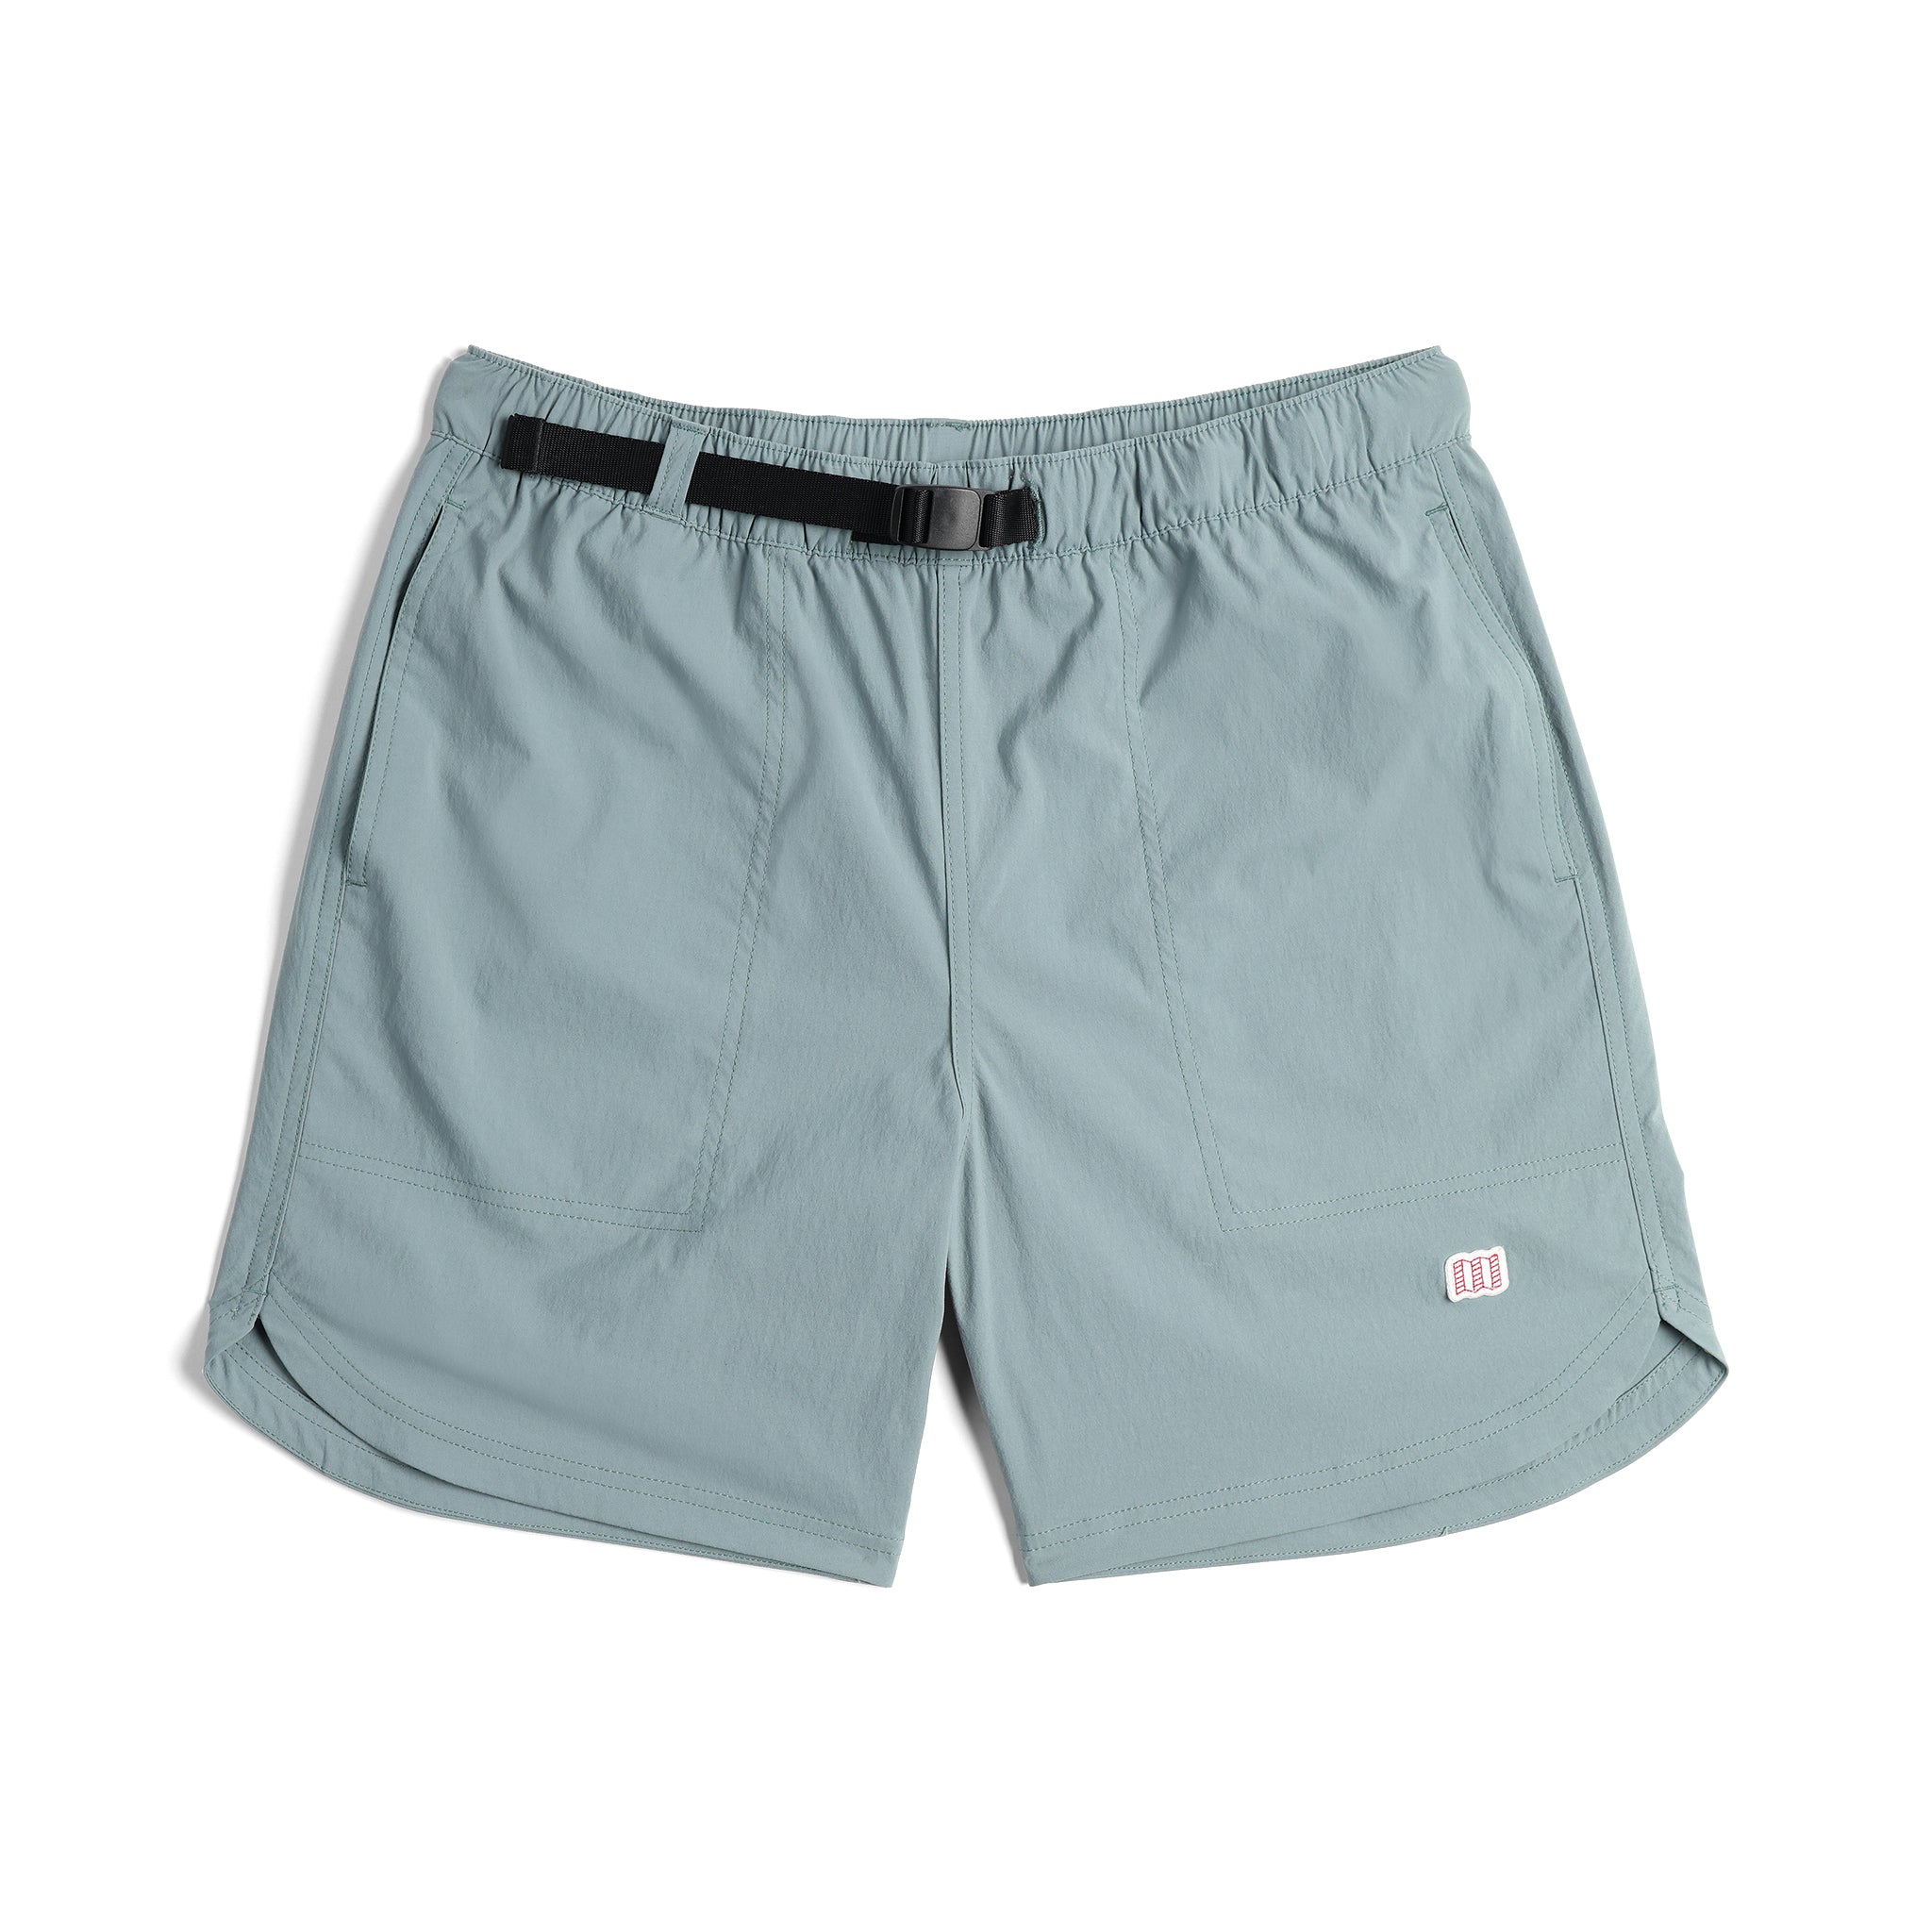 Front View of Topo Designs River Shorts - Men's in "Slate Blue"